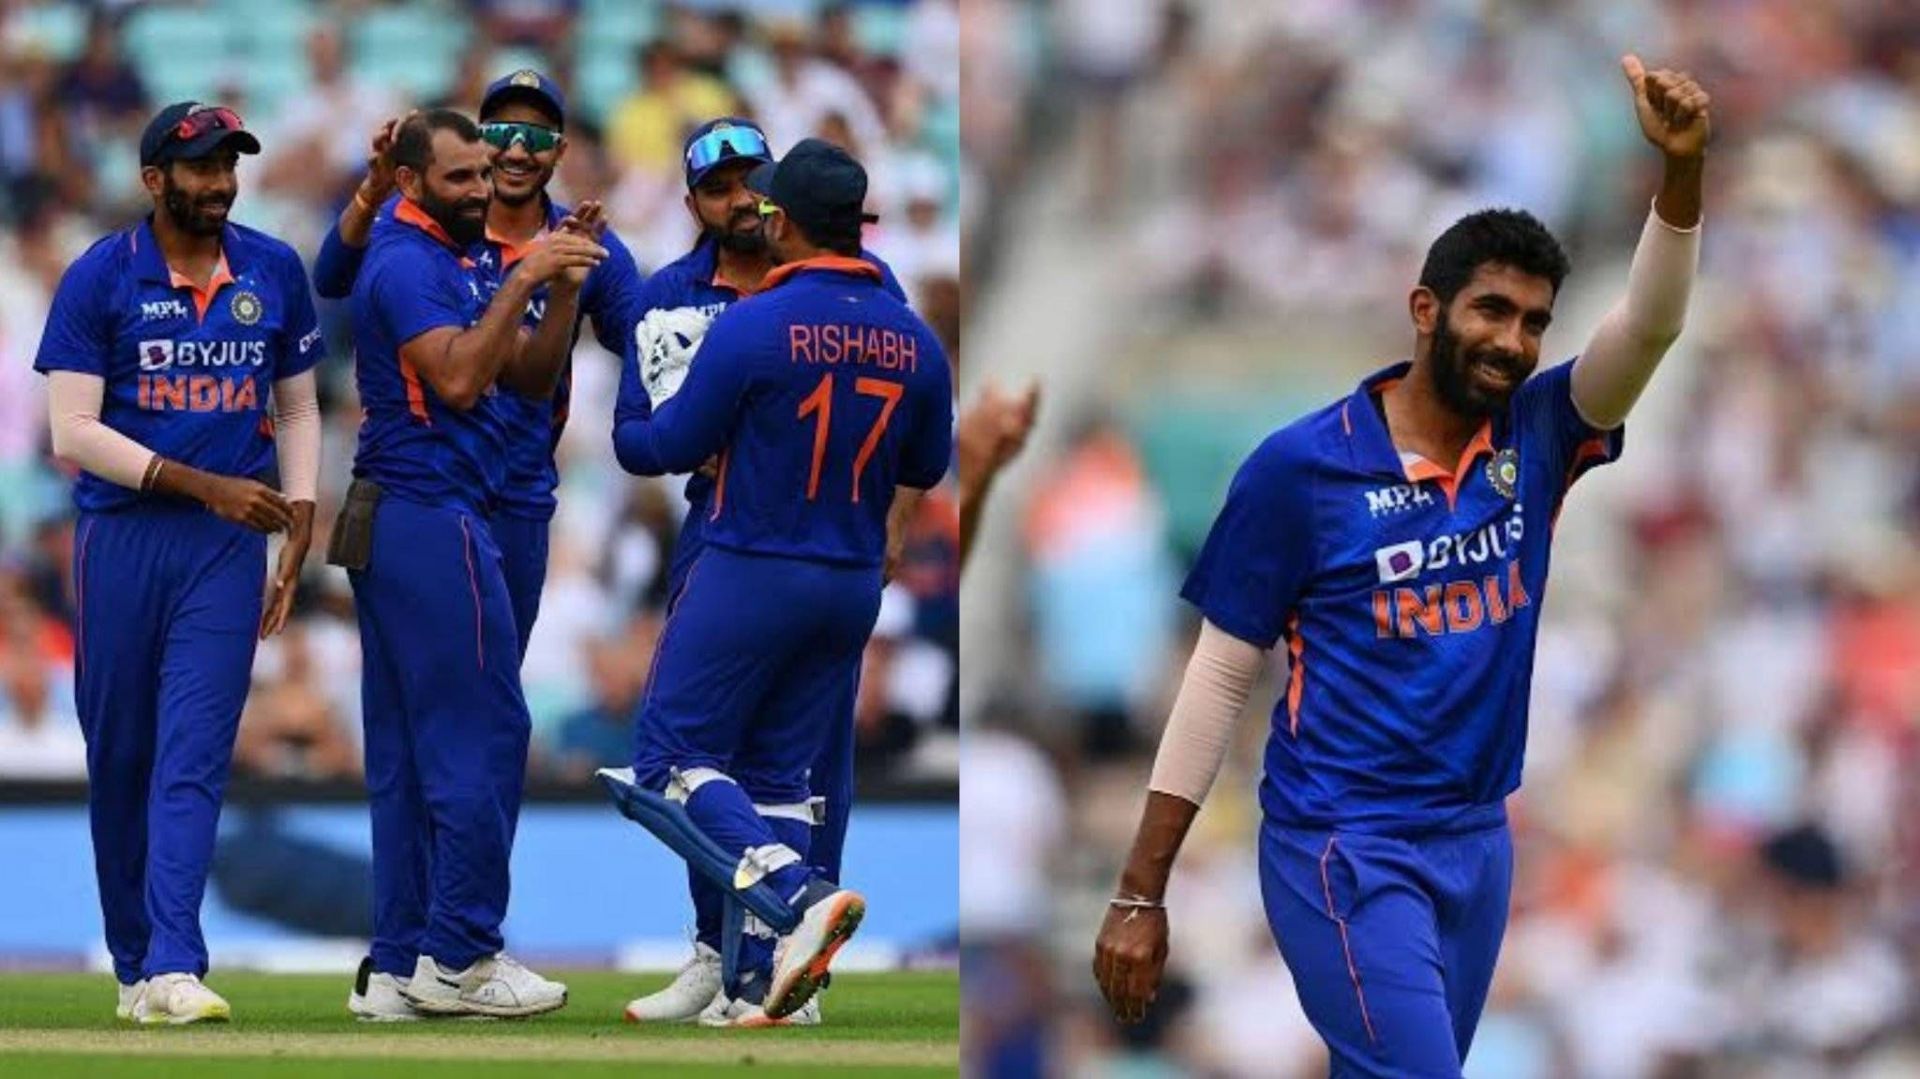 Jasprit Bumrah and Mohammed Shami have destroyed many teams